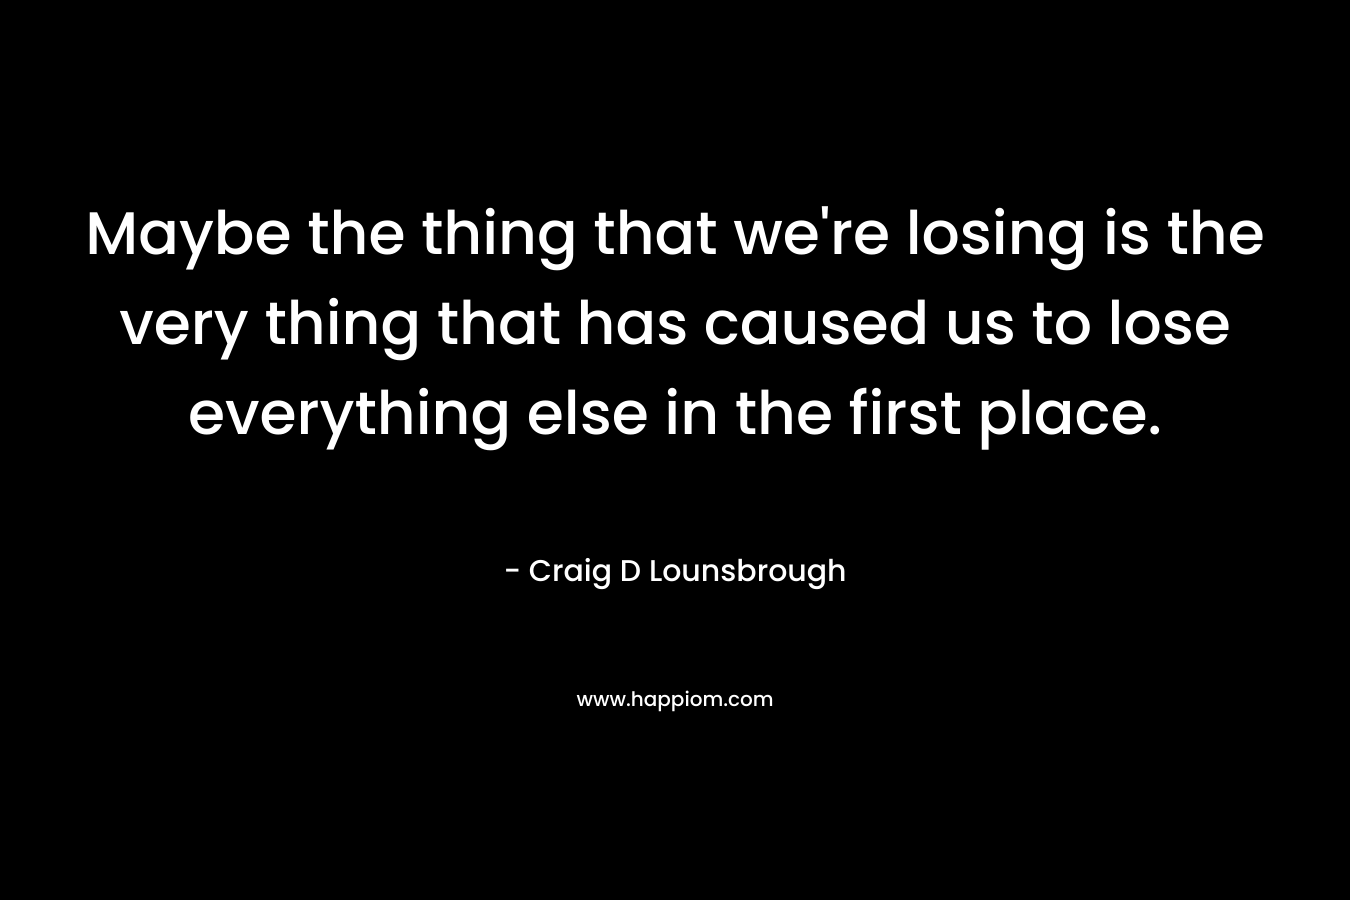 Maybe the thing that we're losing is the very thing that has caused us to lose everything else in the first place.